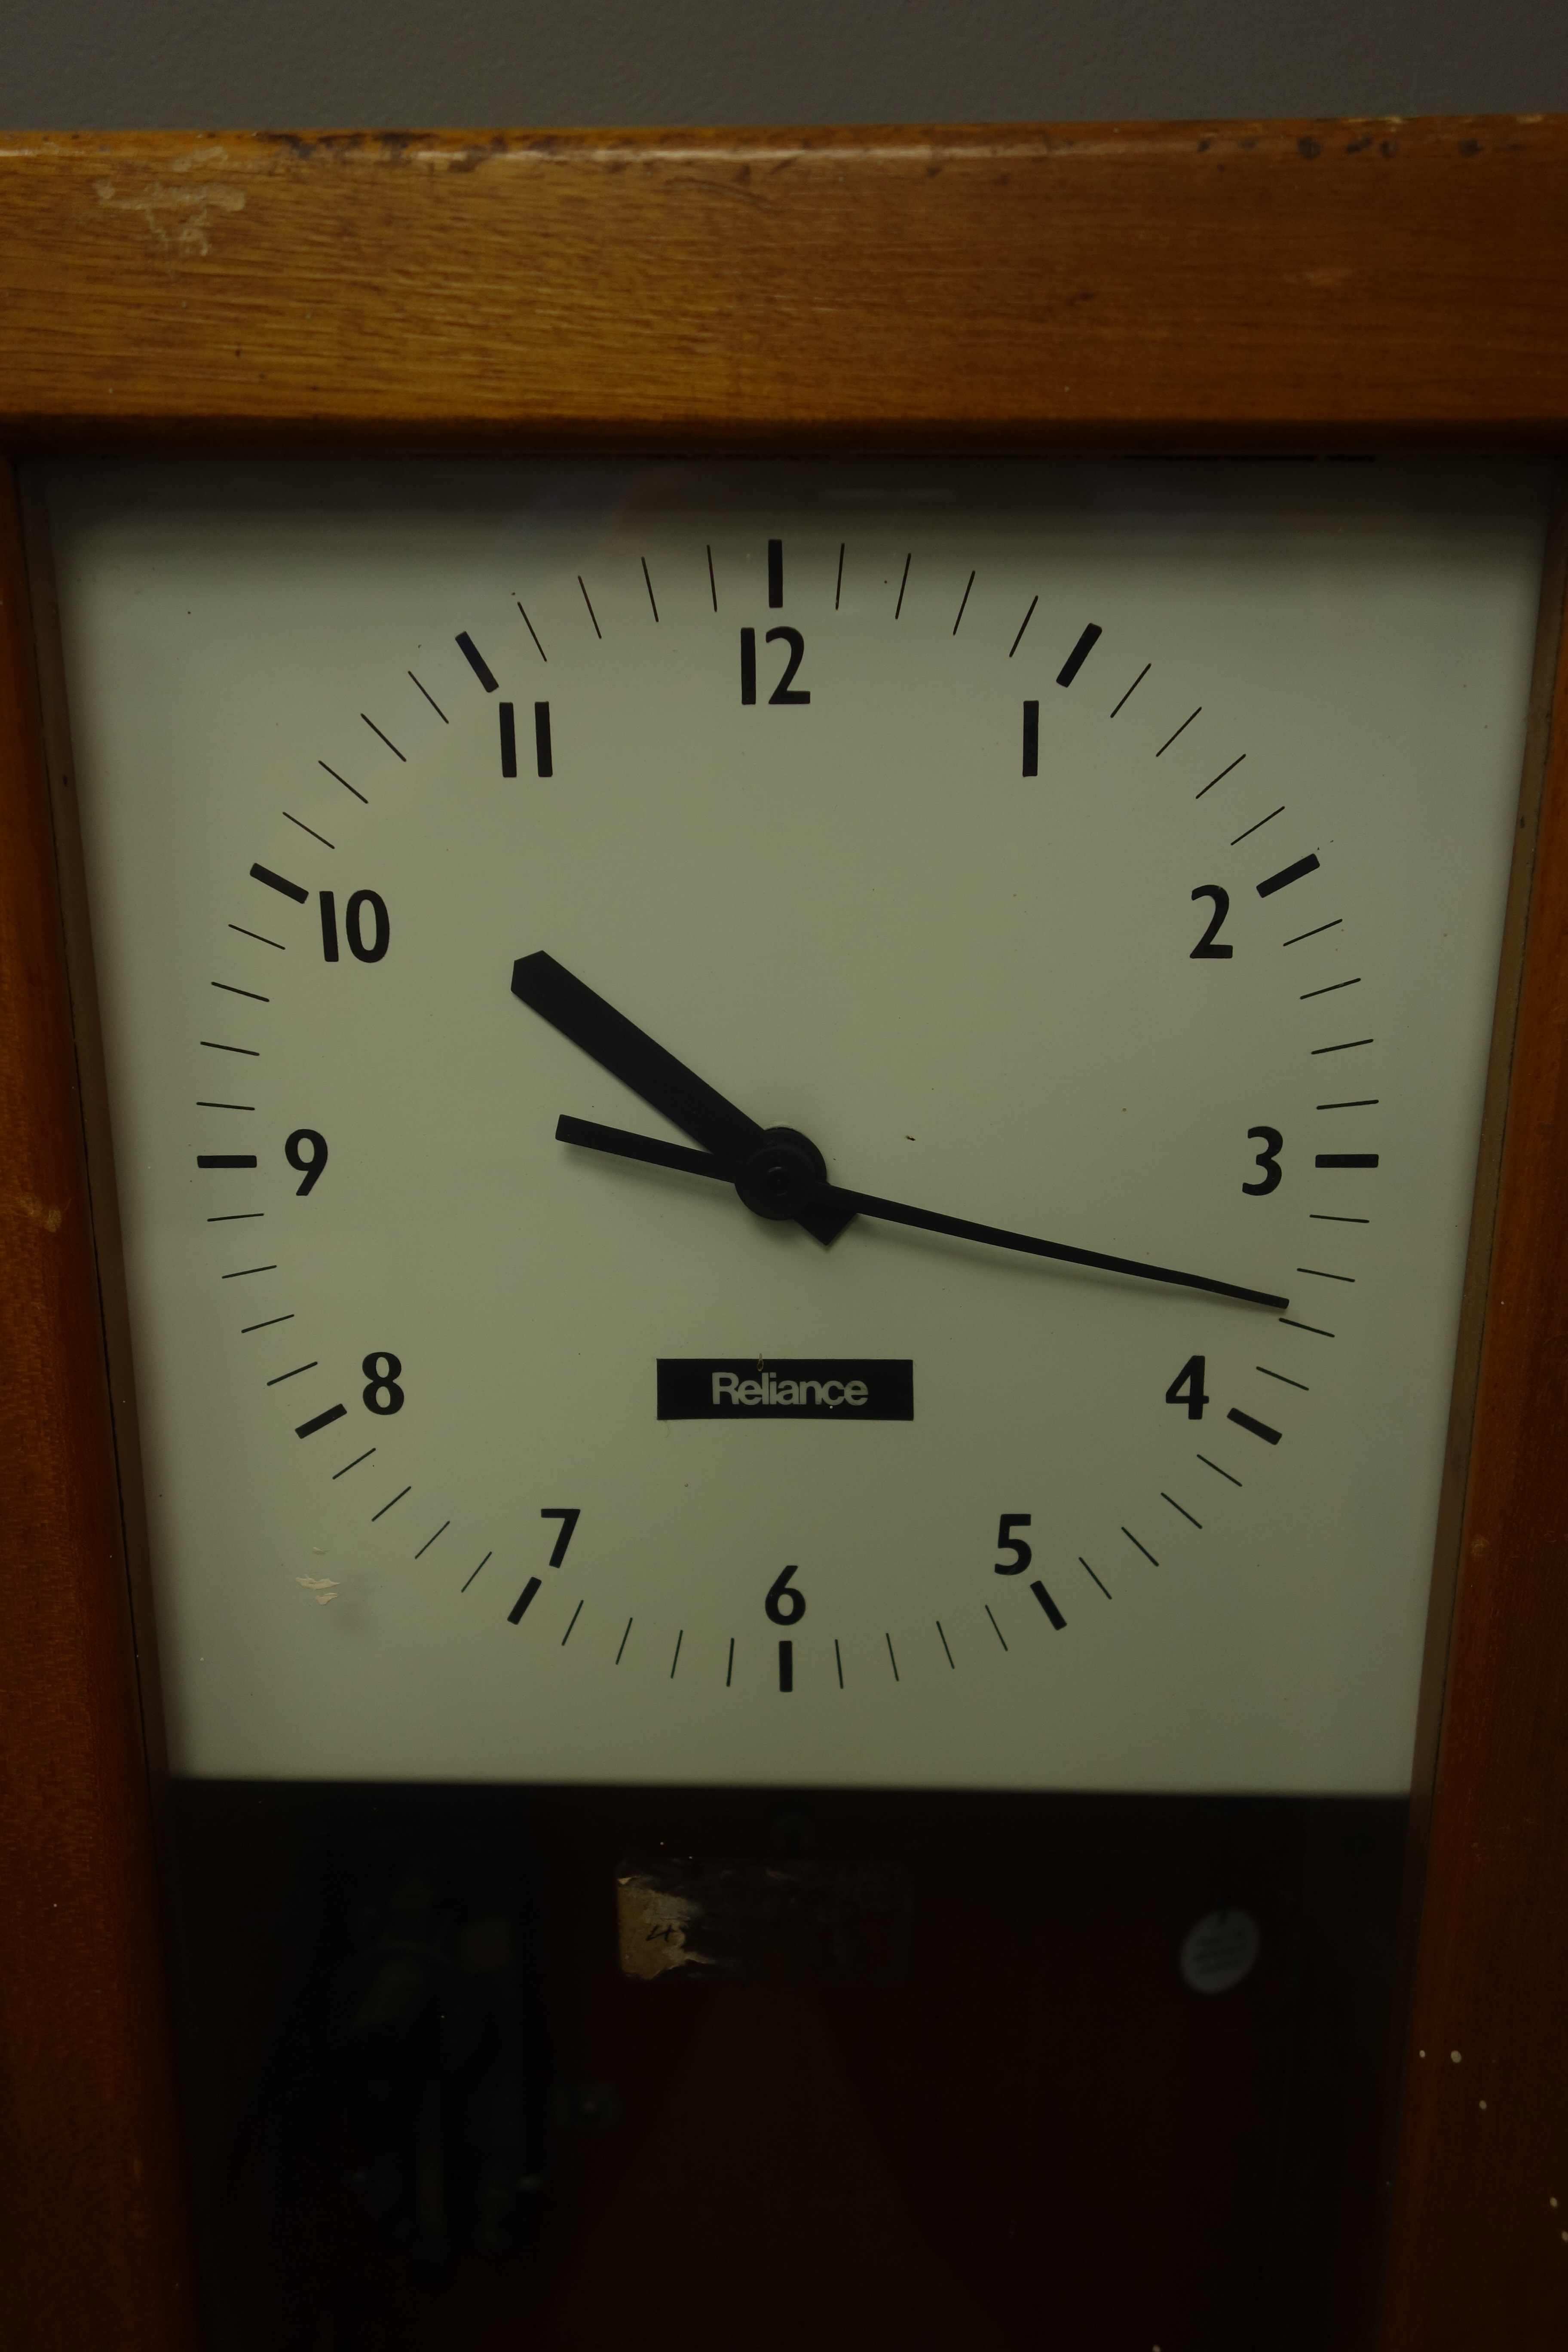 Gents' of Leicester teak cased electric master clock with pendulum, enclosed by glazed door, - Image 2 of 2